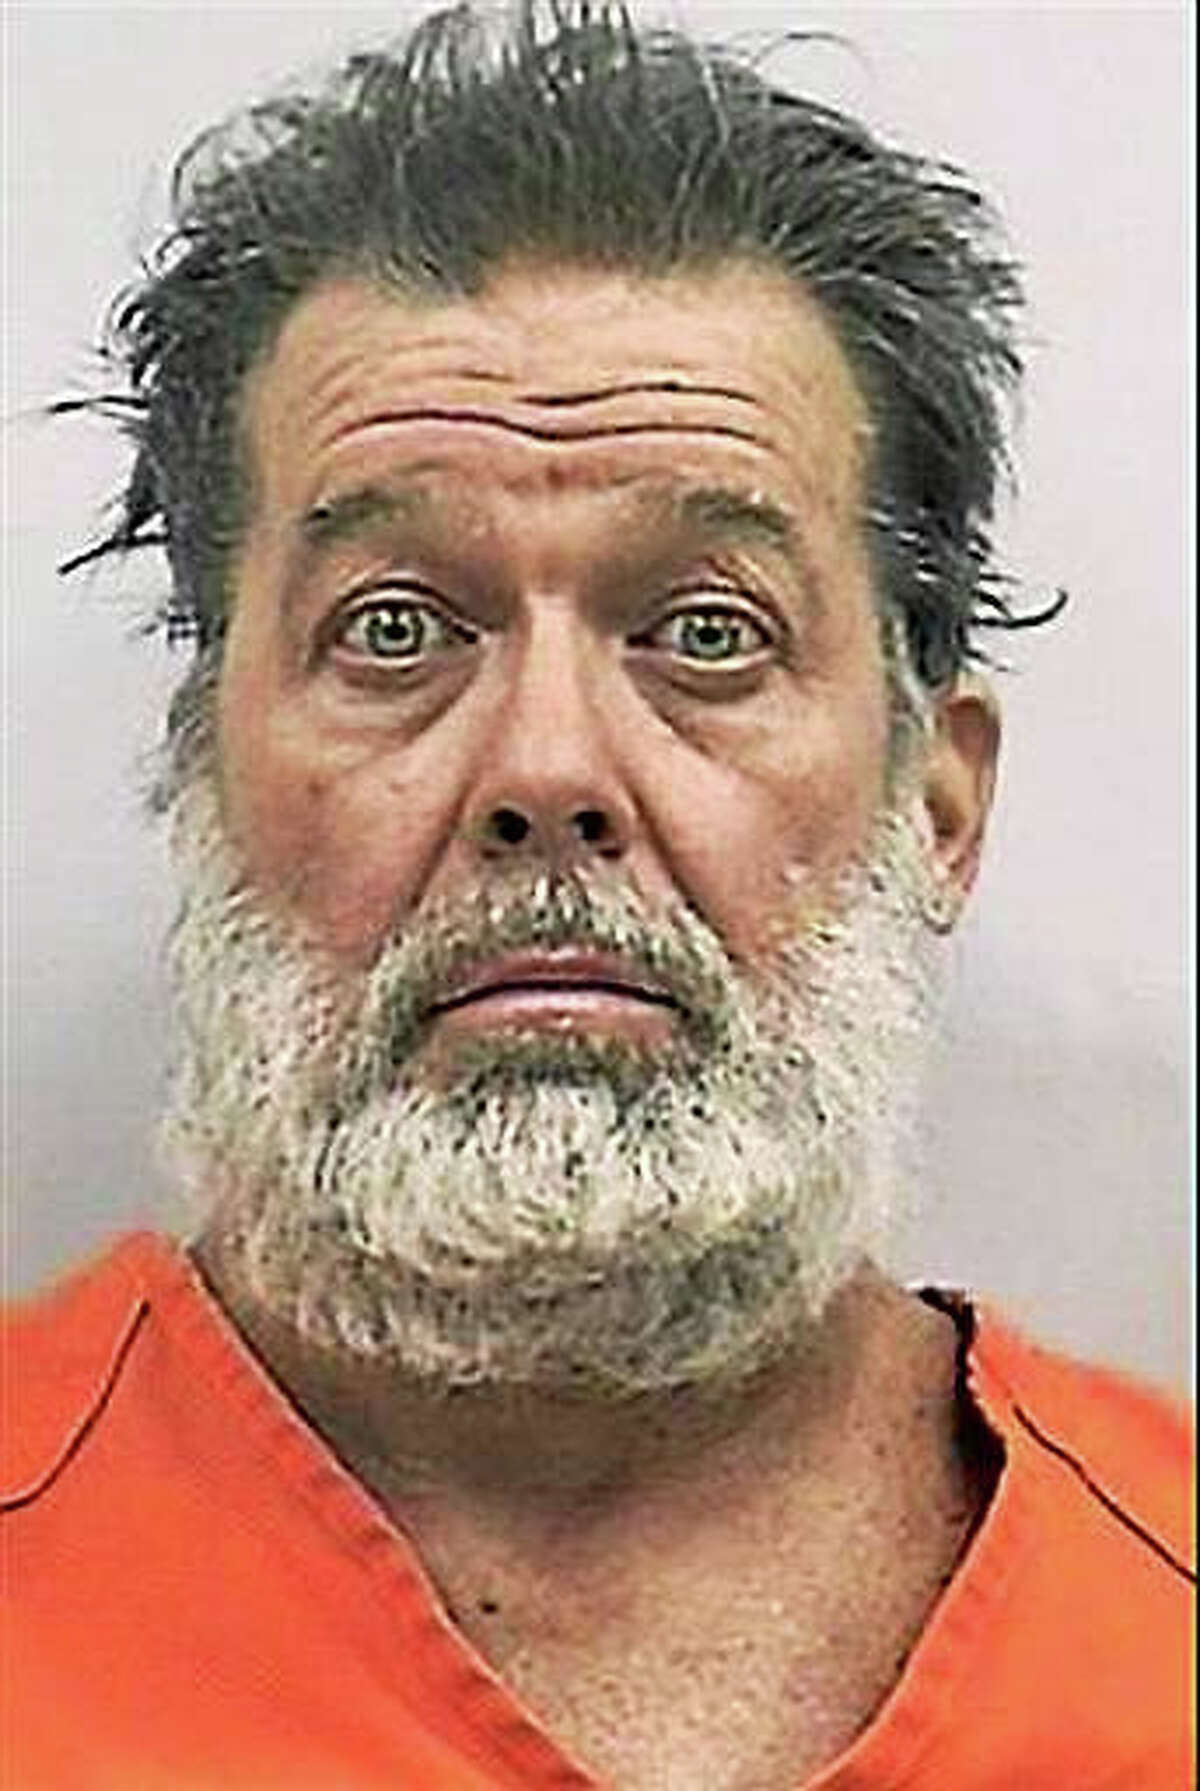 Colorado Springs shooting suspect Robert Lewis Dear of North Carolina is seen in an undated photo provided by the El Paso County Sheriff’s Office. A gunman burst into a Planned Parenthood clinic Friday, Nov. 27, 2015, and opened fire, launching several gunbattles and an hours-long standoff with police as patients and staff took cover. By the time the shooter surrendered, at least three people were killed, including a police officer and at least nine others were wounded, authorities said.